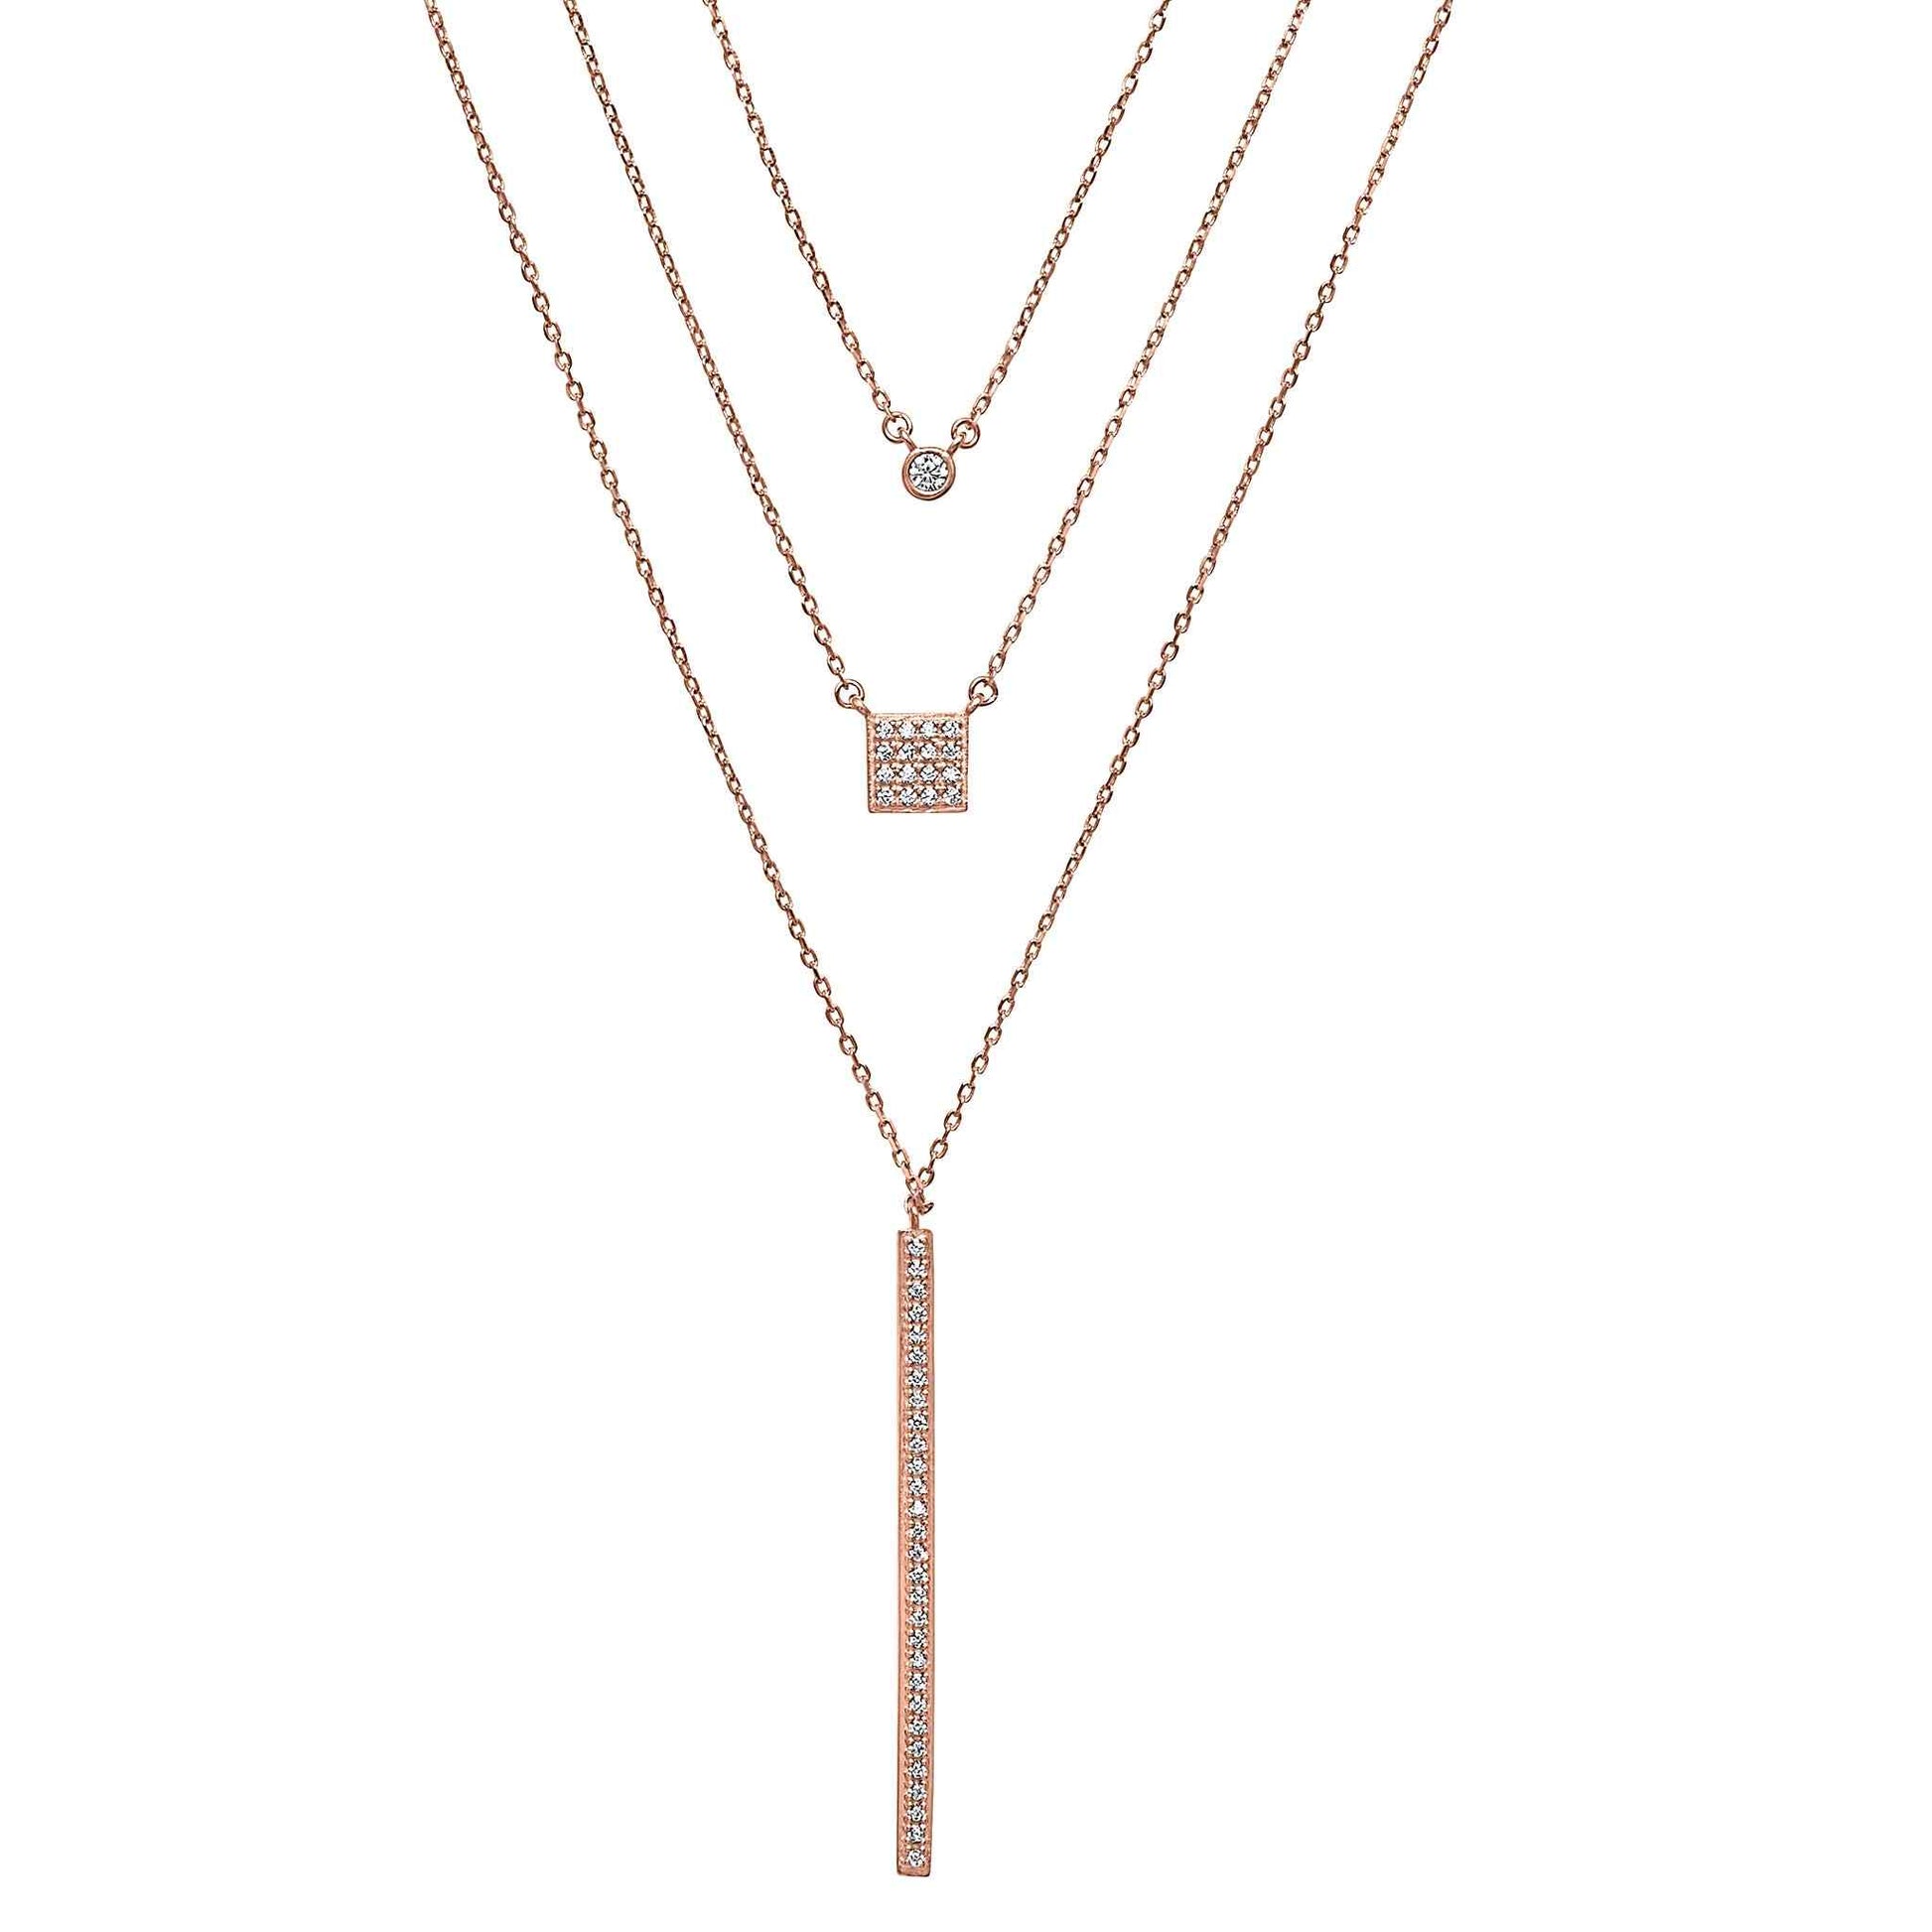 A layered sterling silver necklace with simulated diamonds displayed on a neutral white background.